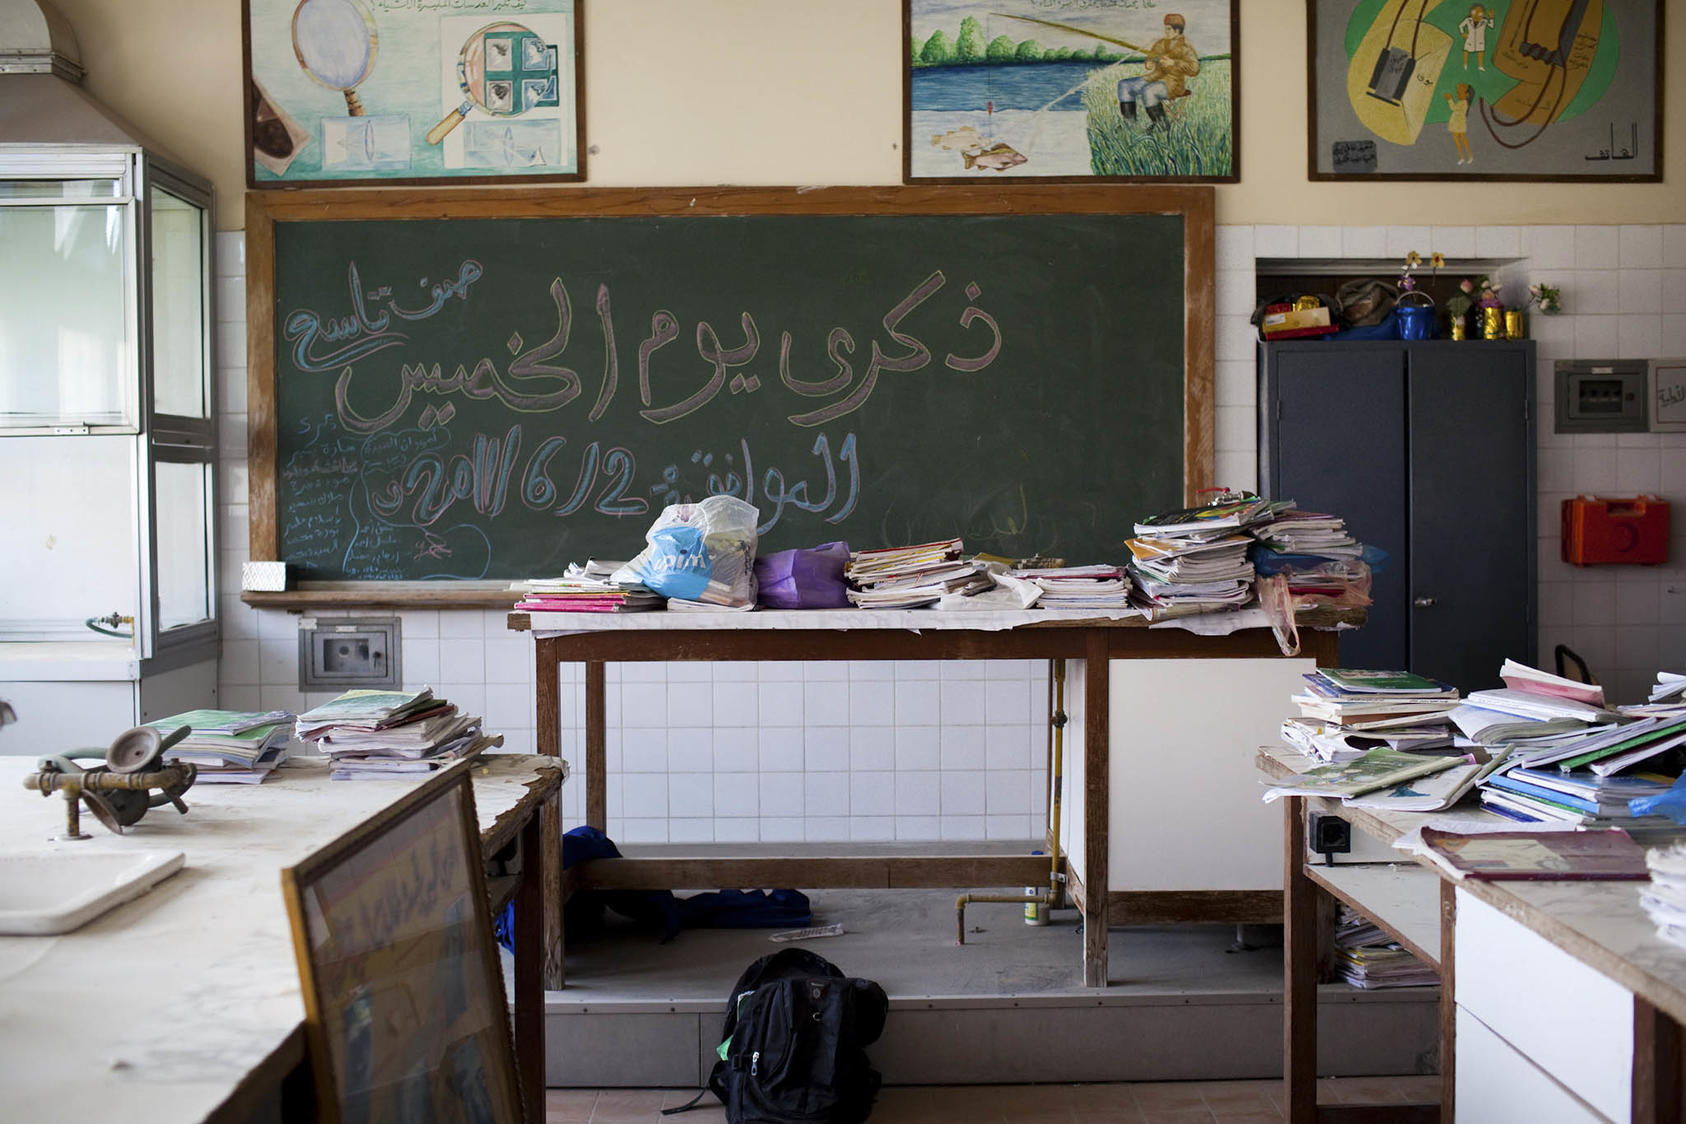 Books from the old Libyan curriculum are stacked up in an unused science laboratory at a school in Tripoli, Libya. October 2, 2011. (Nicole Tung/The New York Times)